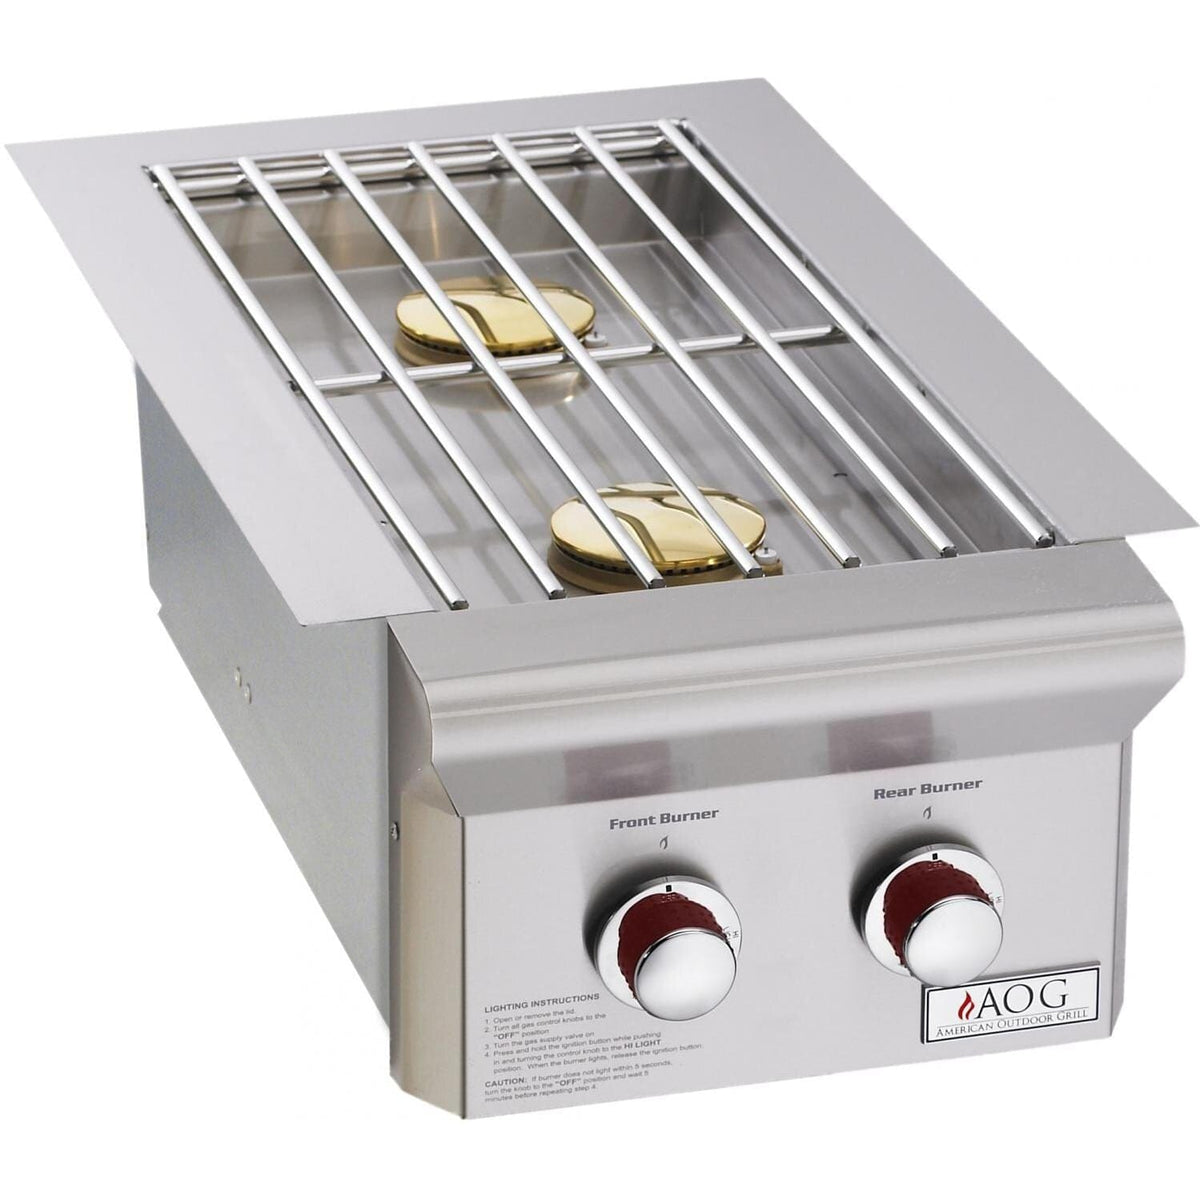 American Outdoor Grill Accessories American Outdoor Grill T-Series Built-In Double Side Burner 25,000 BTU’s - 3282T(P)